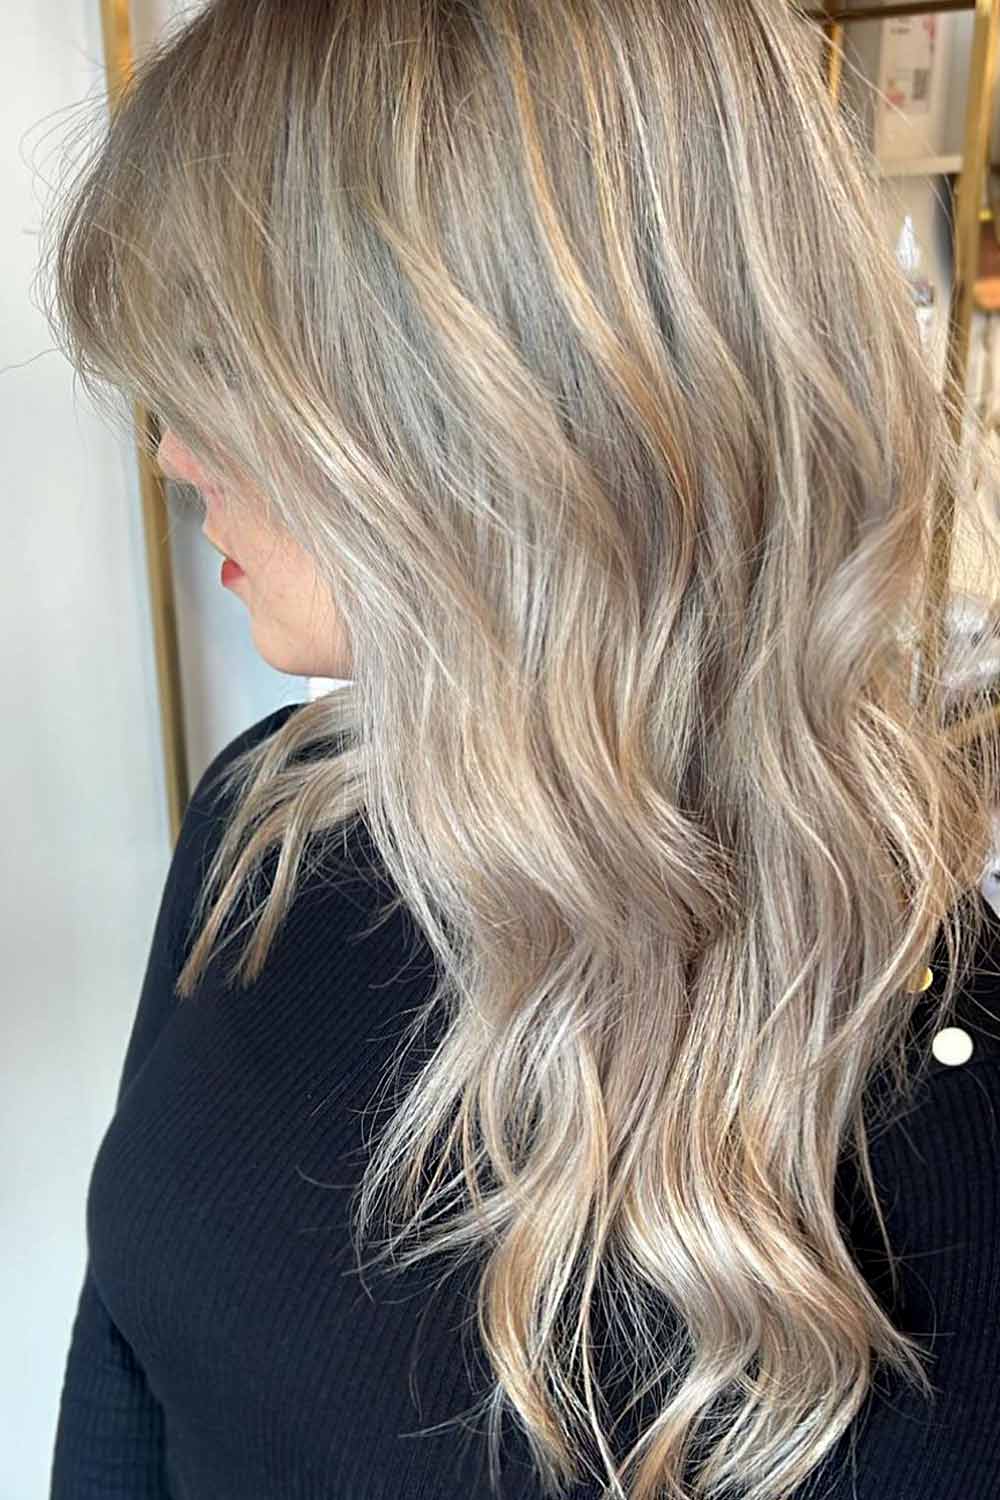 Mushroom Hairstyle with Warm Babylights #mushroomblonde #mushroomblondehair #blondehair